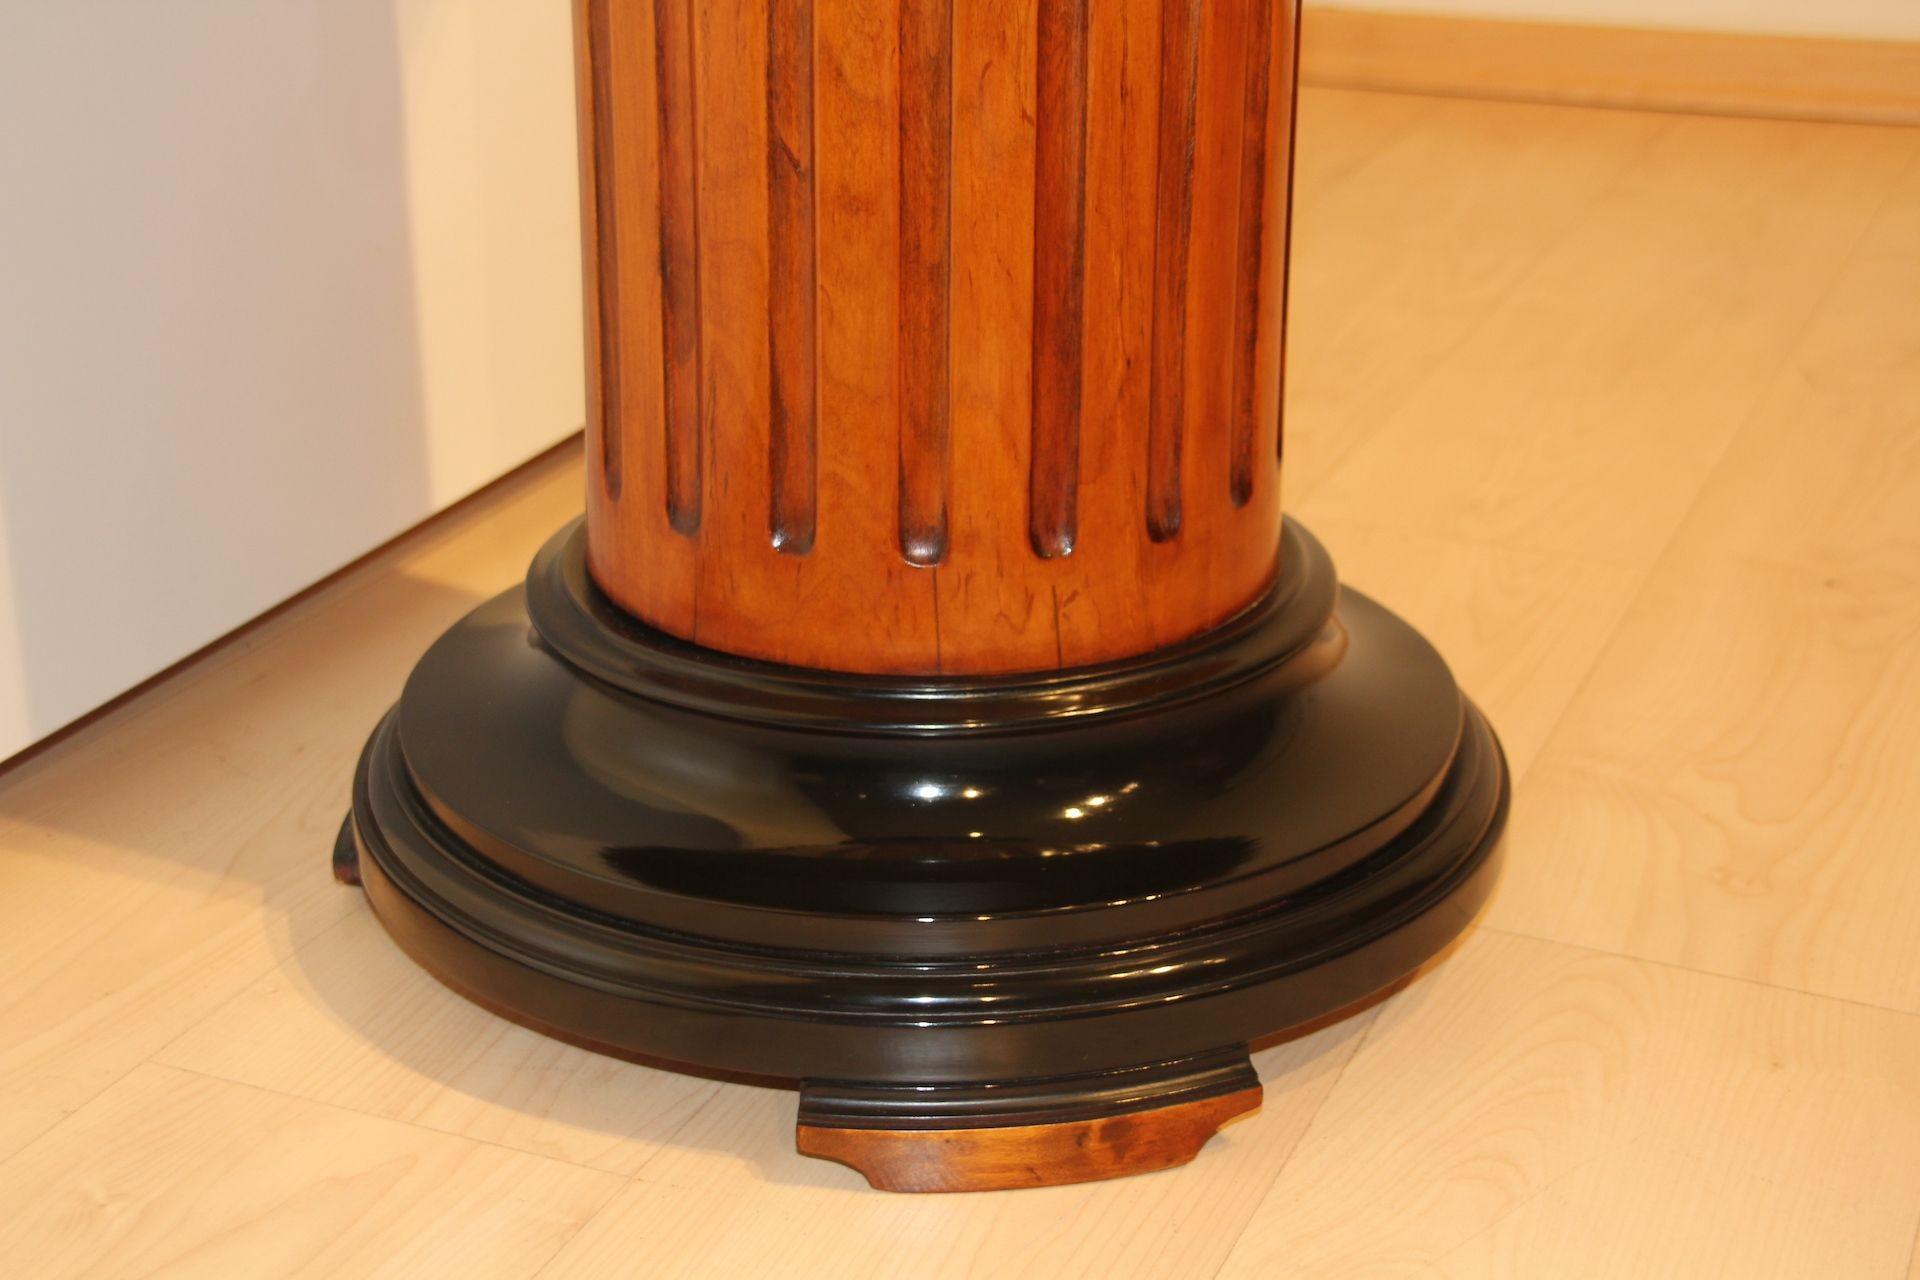 Neoclassical Rotating Pedestal, Beech Wood, French Polished, Germany, Circa 1920 For Sale 4